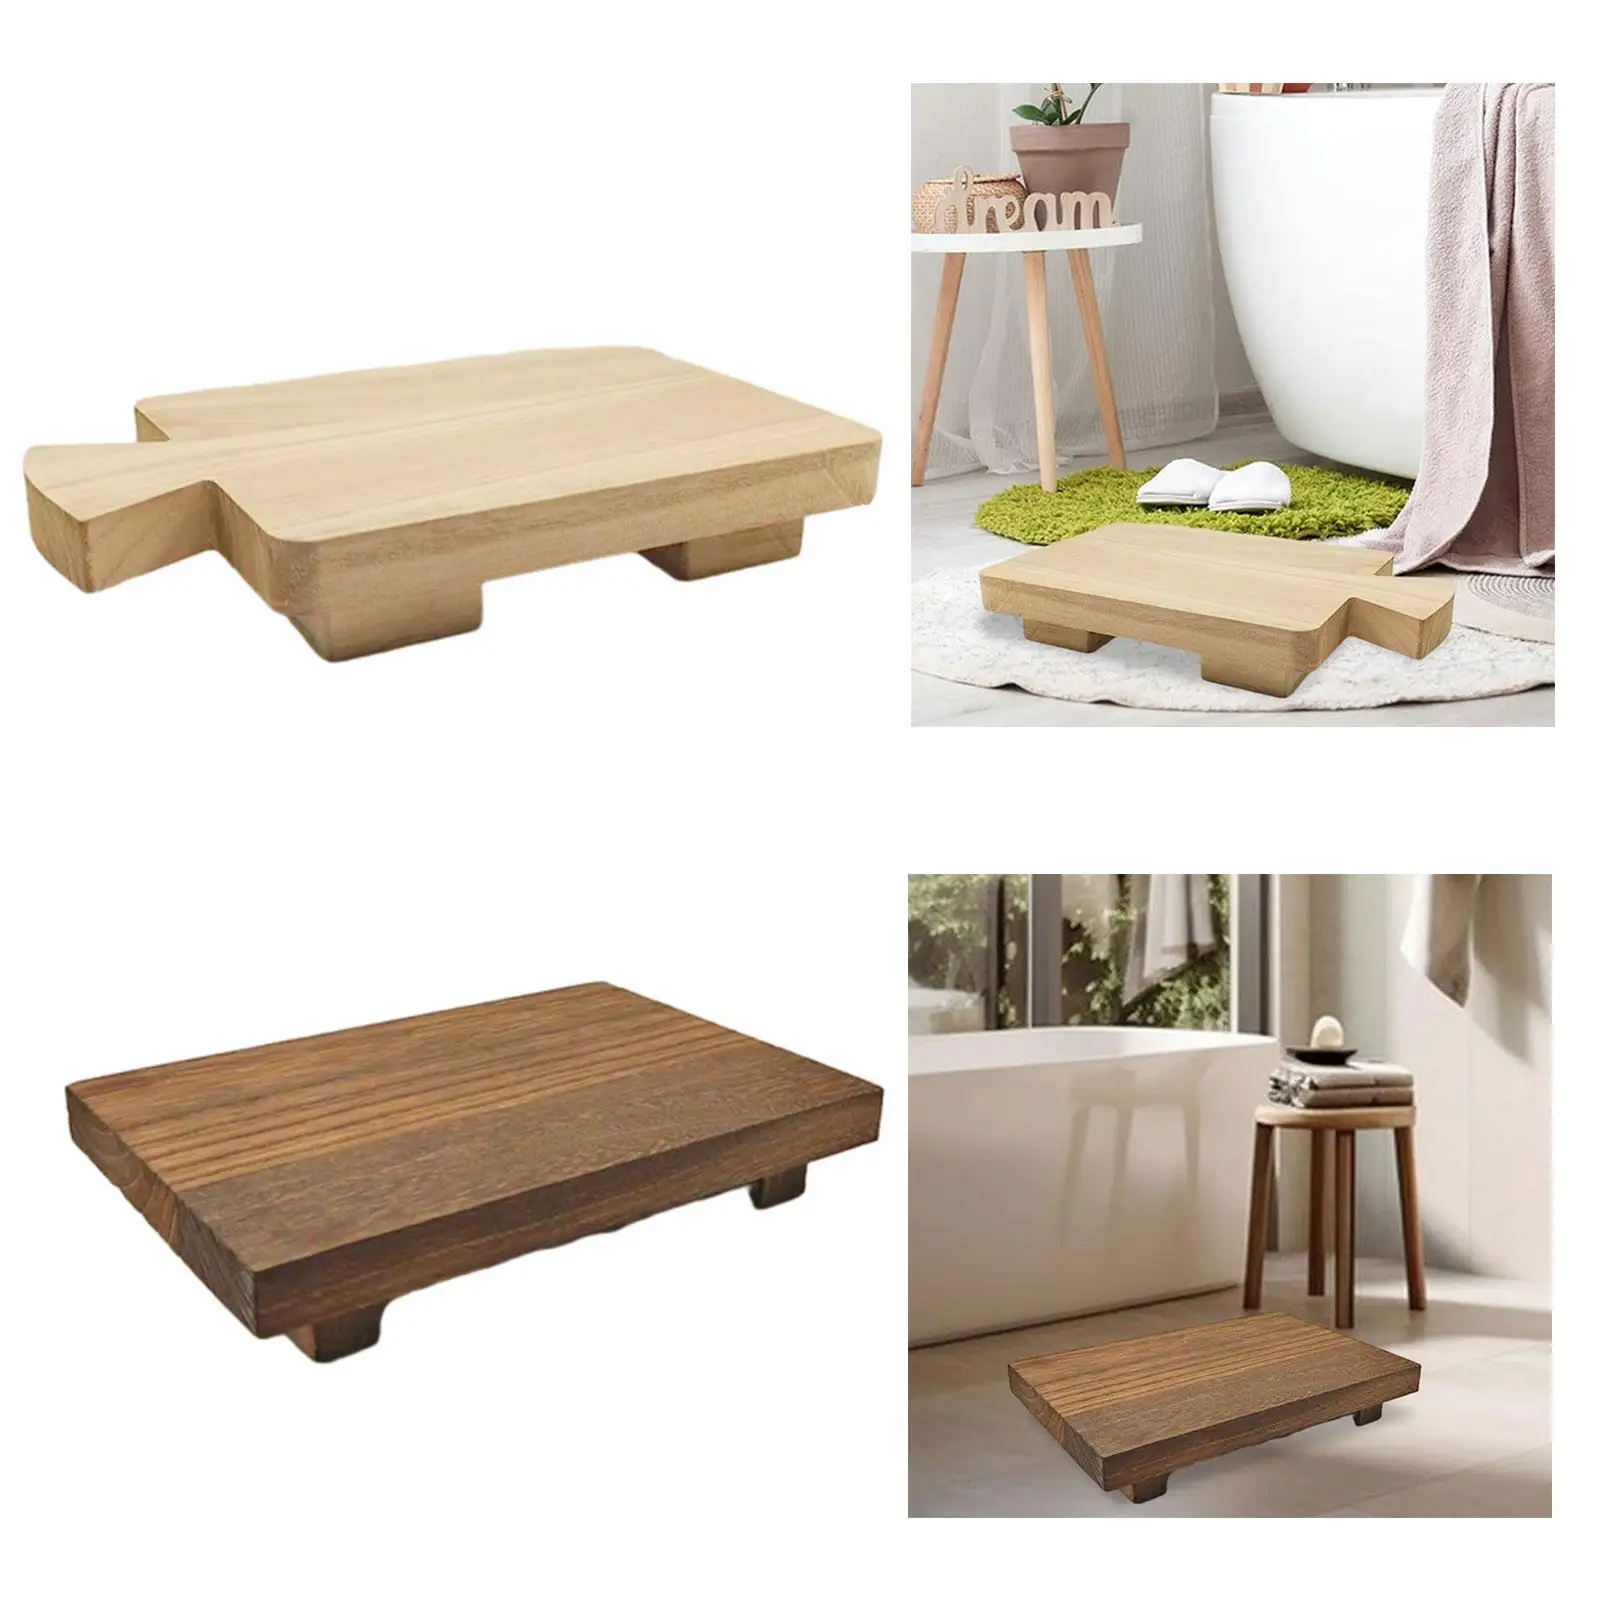 Wooden Pedestal Stand Footed Tray for Kitchen Counter Bathroom Coffee Table